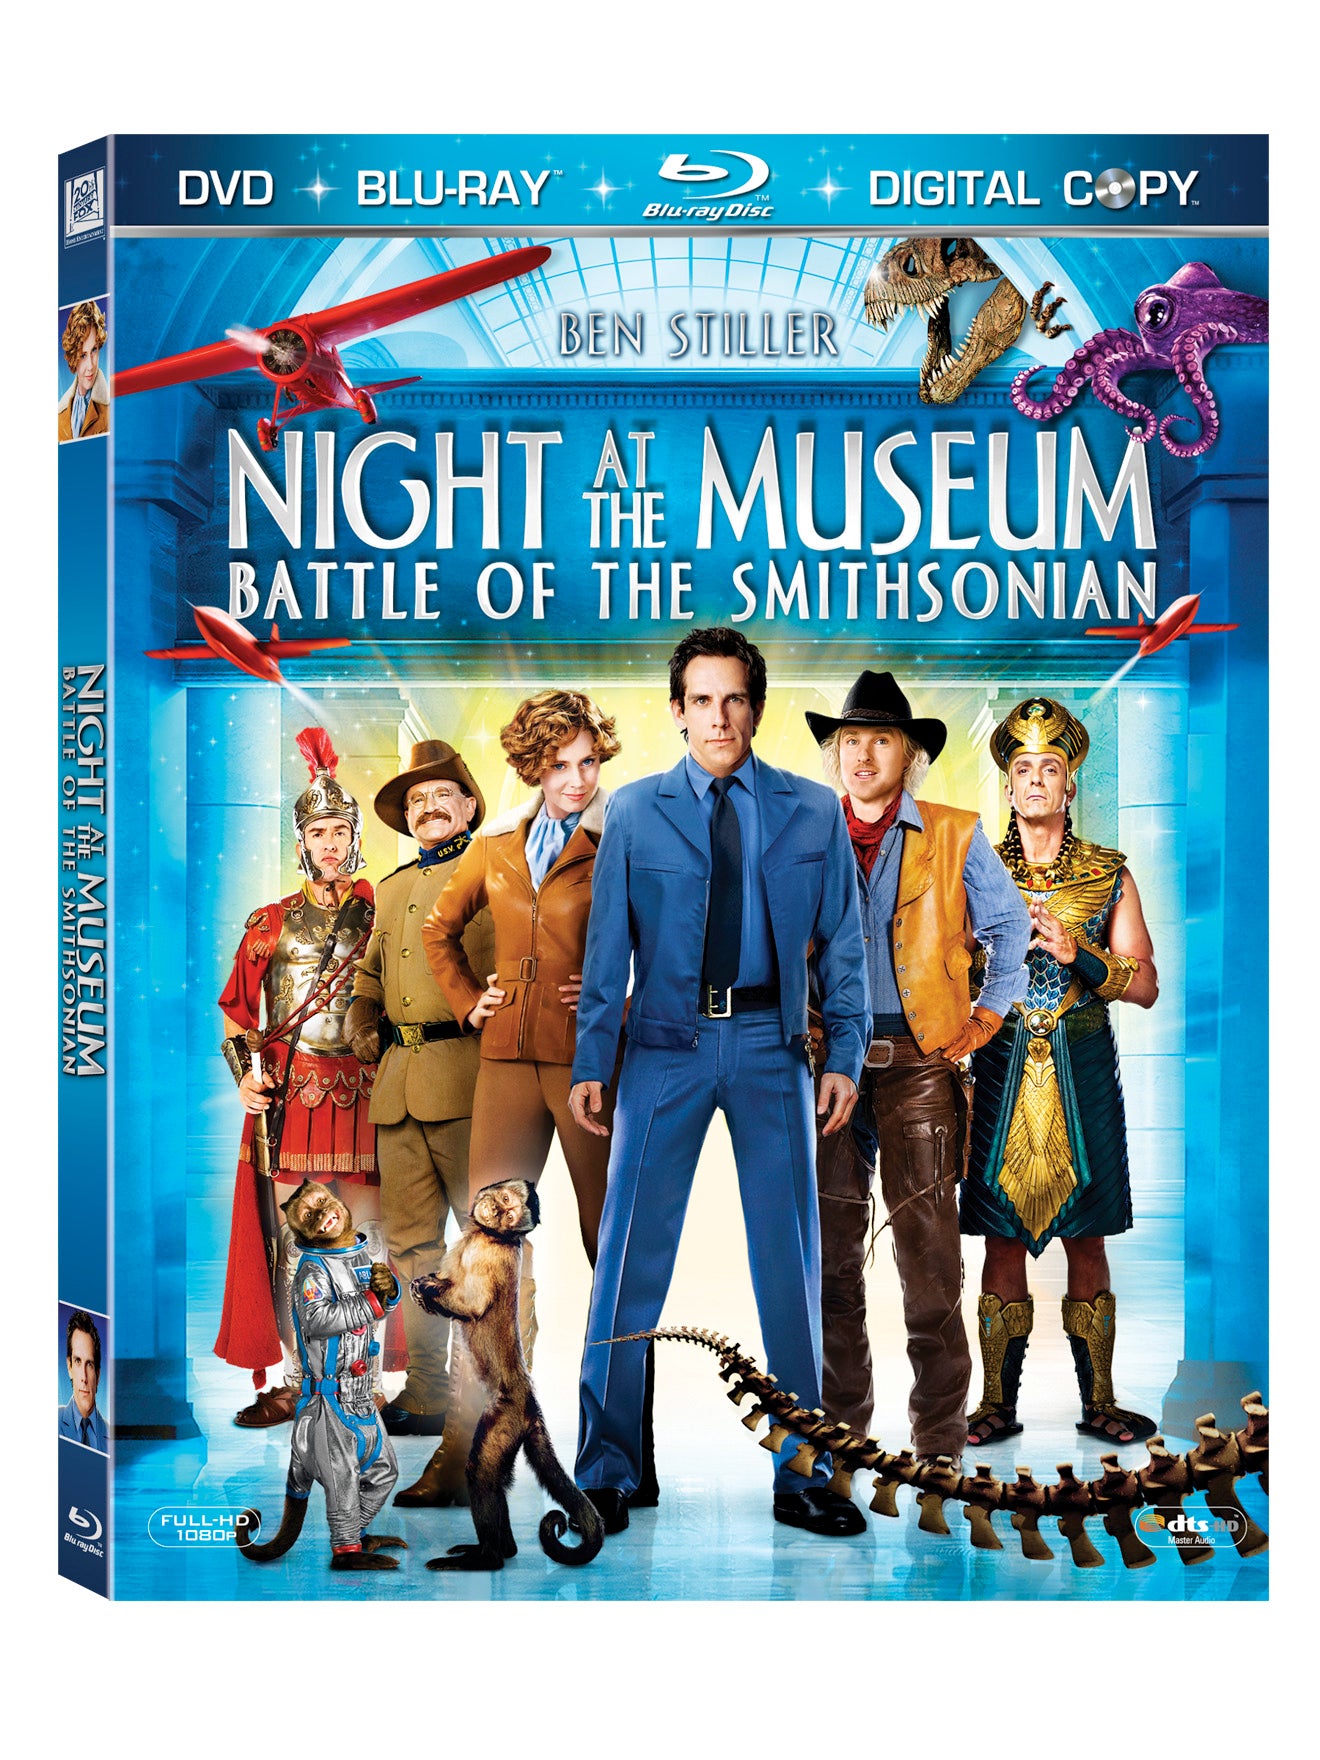 Night at the Museum: Battle of the Smithsonian DVD *NEW*